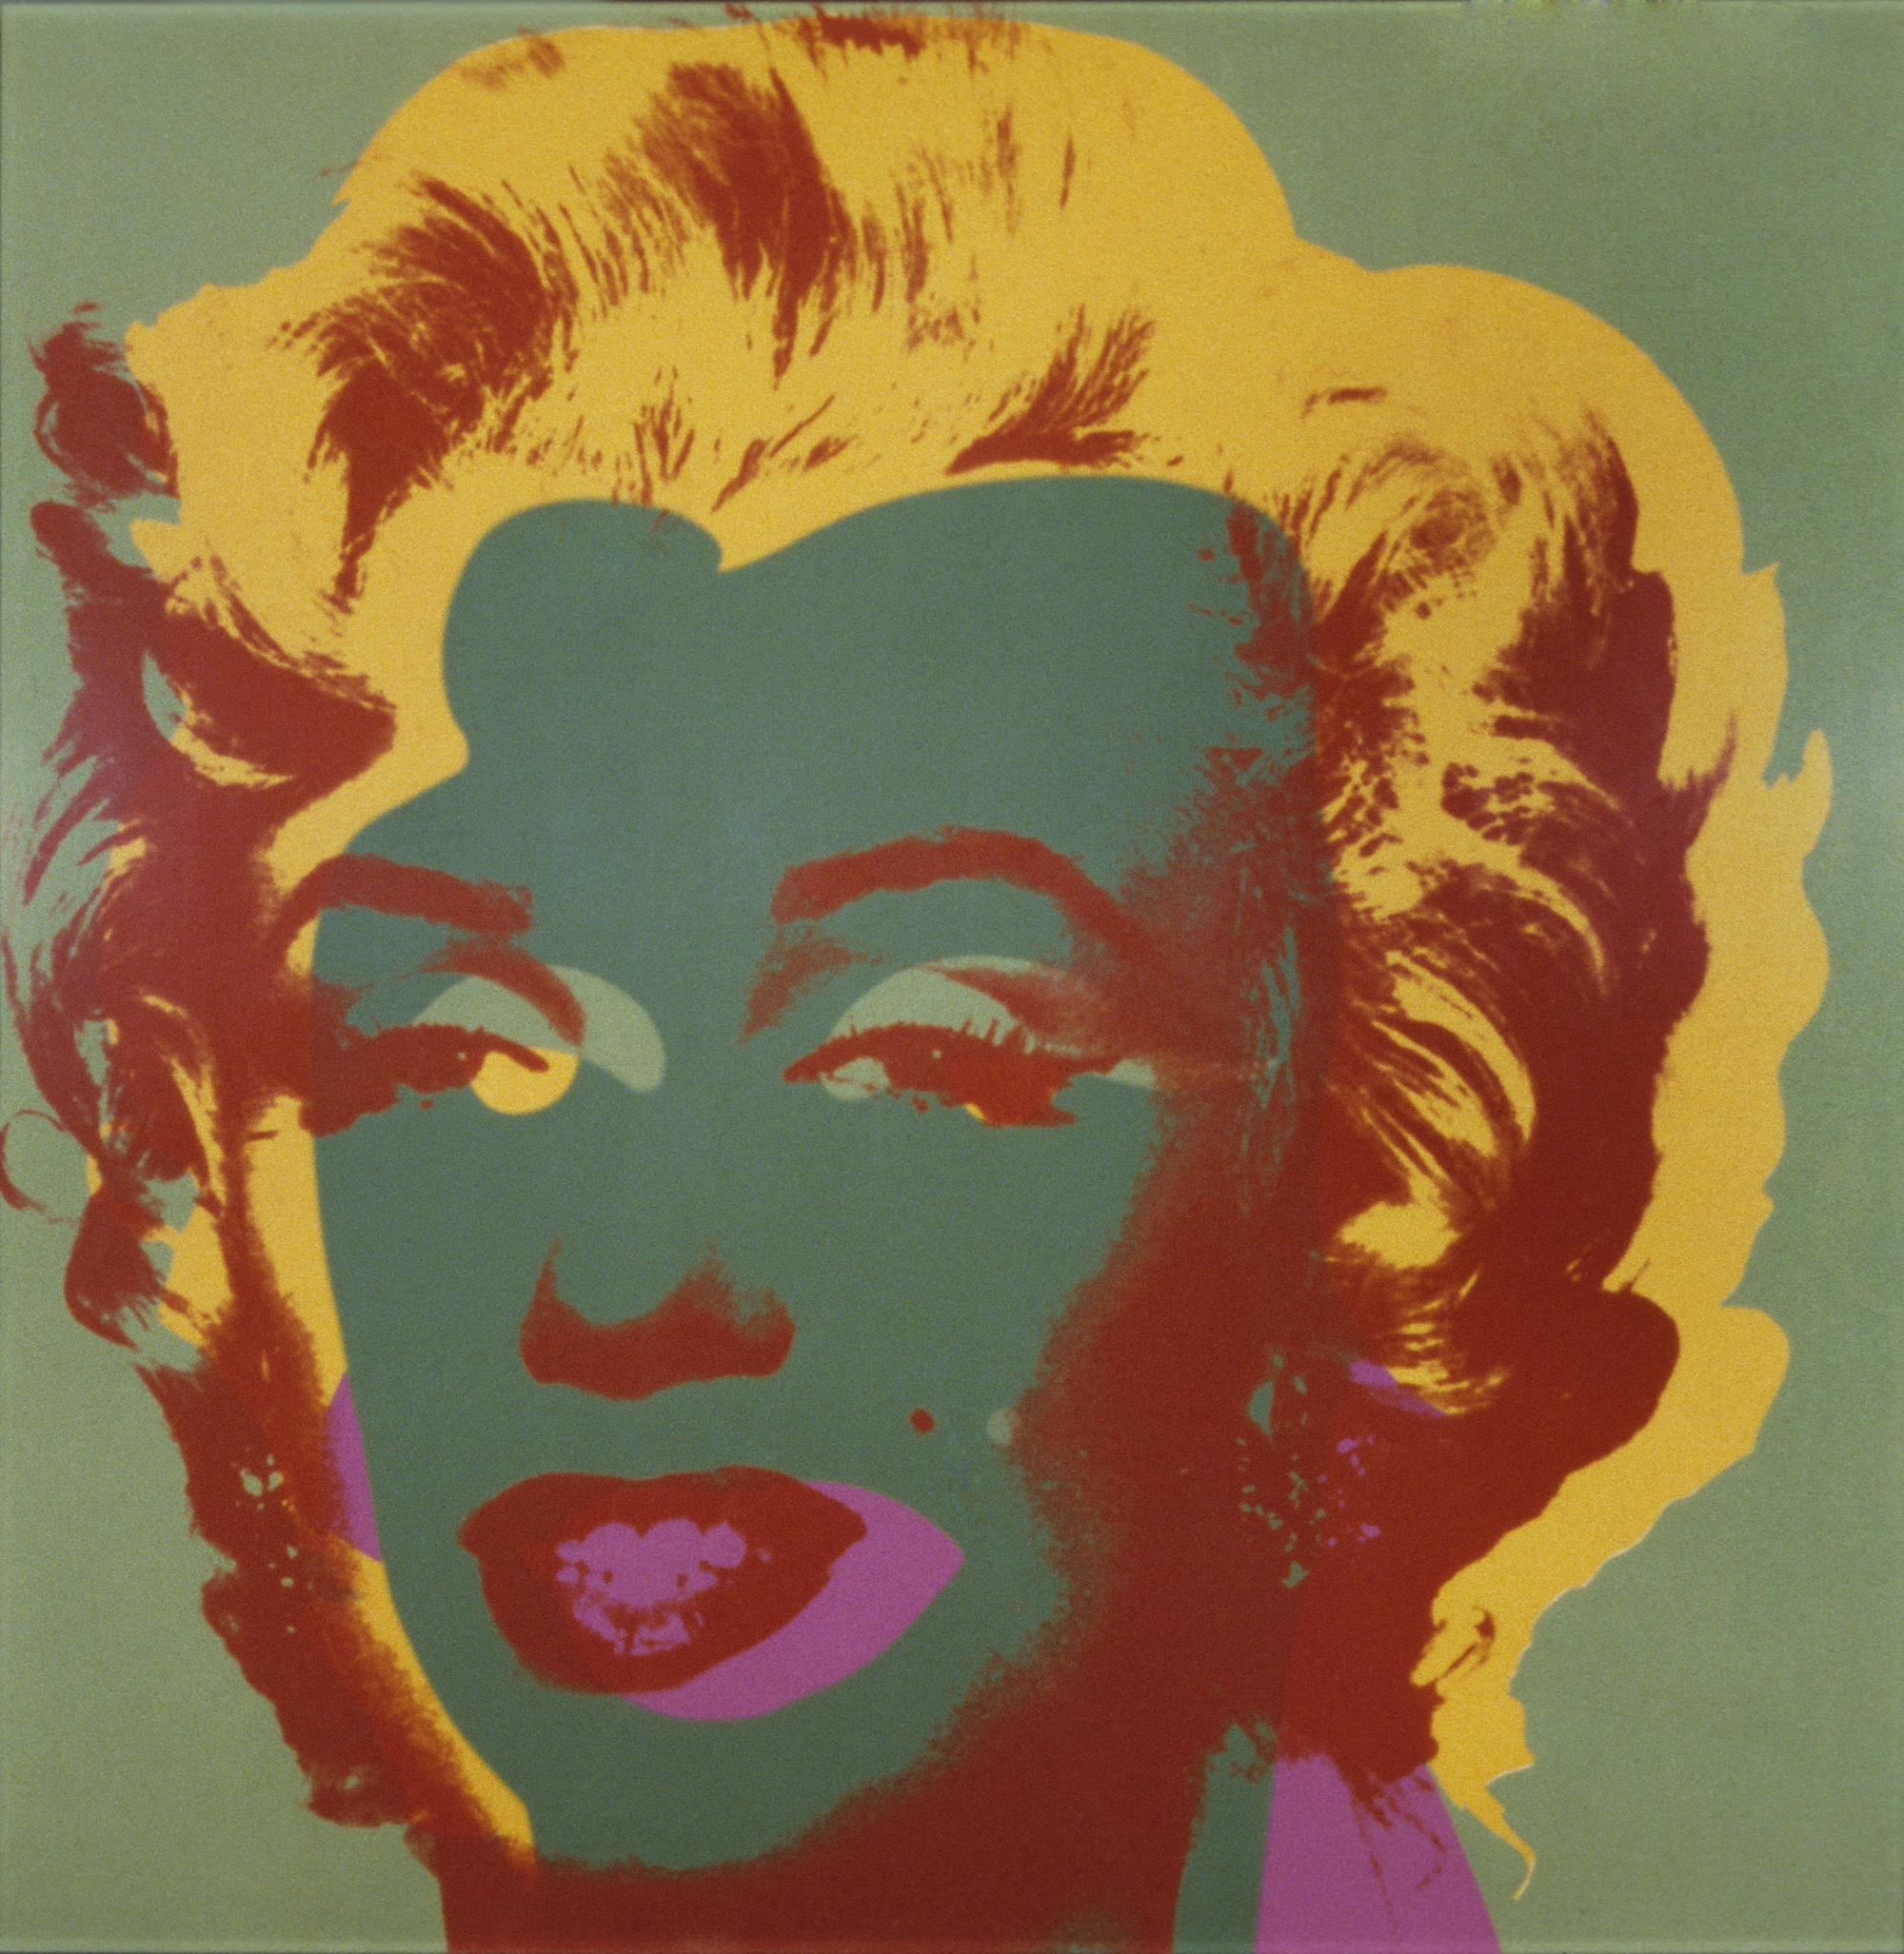 Andy Warhol, <i>Marilyn</i>, 1967. Eli and Edythe Broad Art Museum, Michigan State University, Gift of Mr. and Mrs. Peter Jones. © 2017 The Andy Warhol Foundation for the Visual Arts/Artists Rights Society (ARS), New York